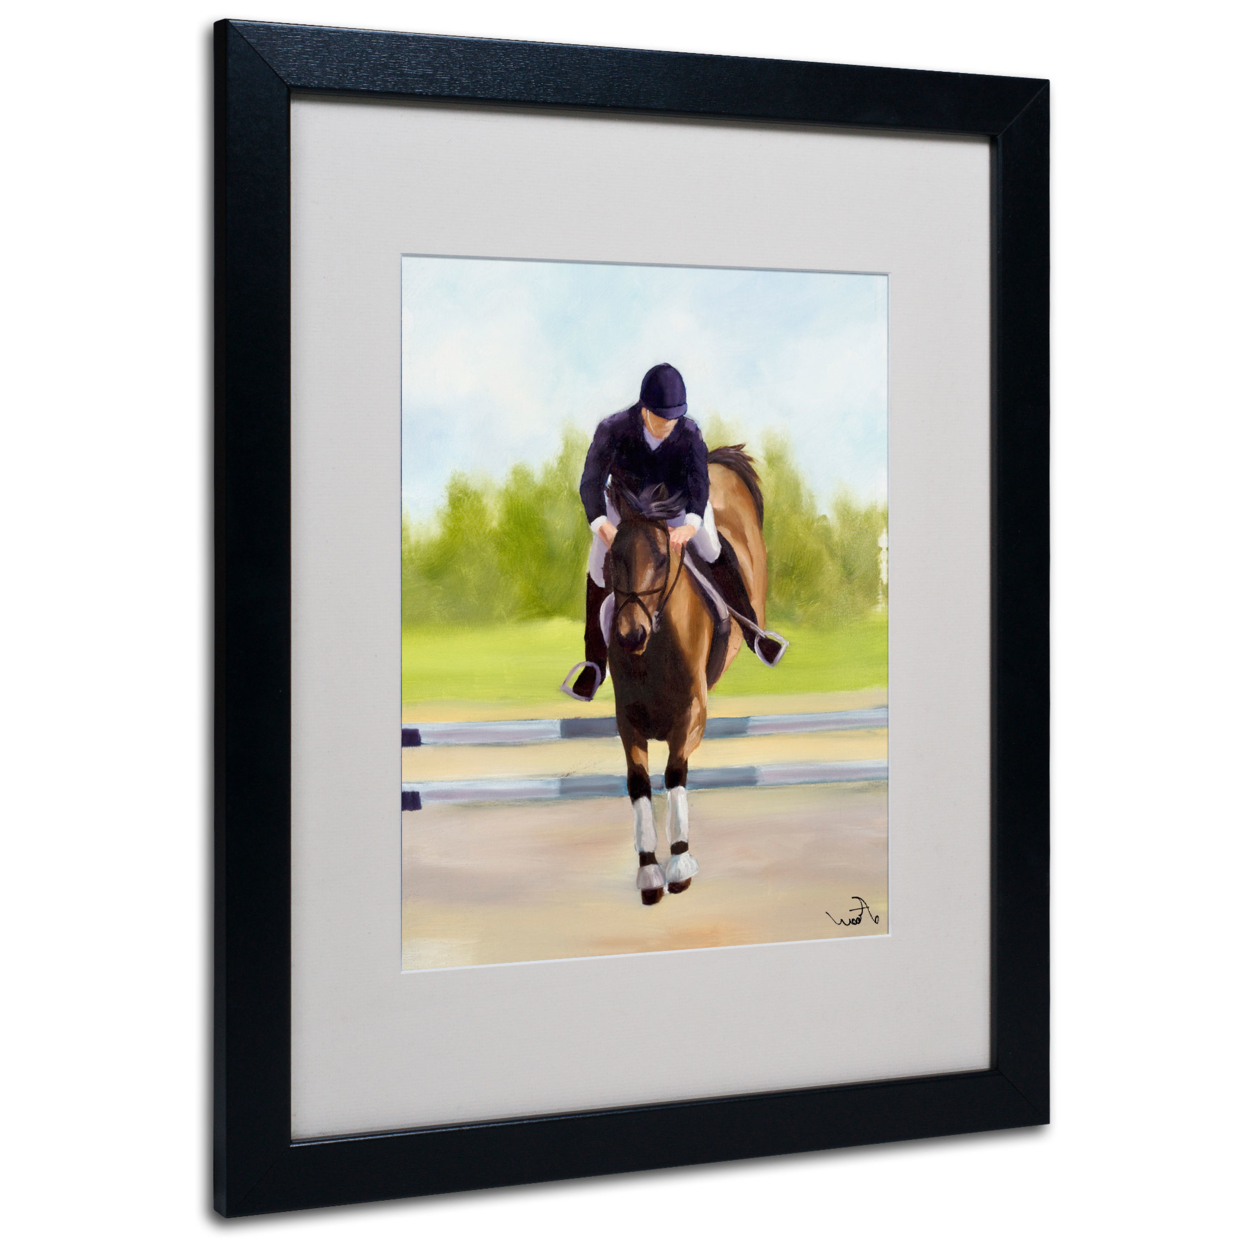 Michelle Moate 'Horse Of Sport X' Black Wooden Framed Art 18 X 22 Inches